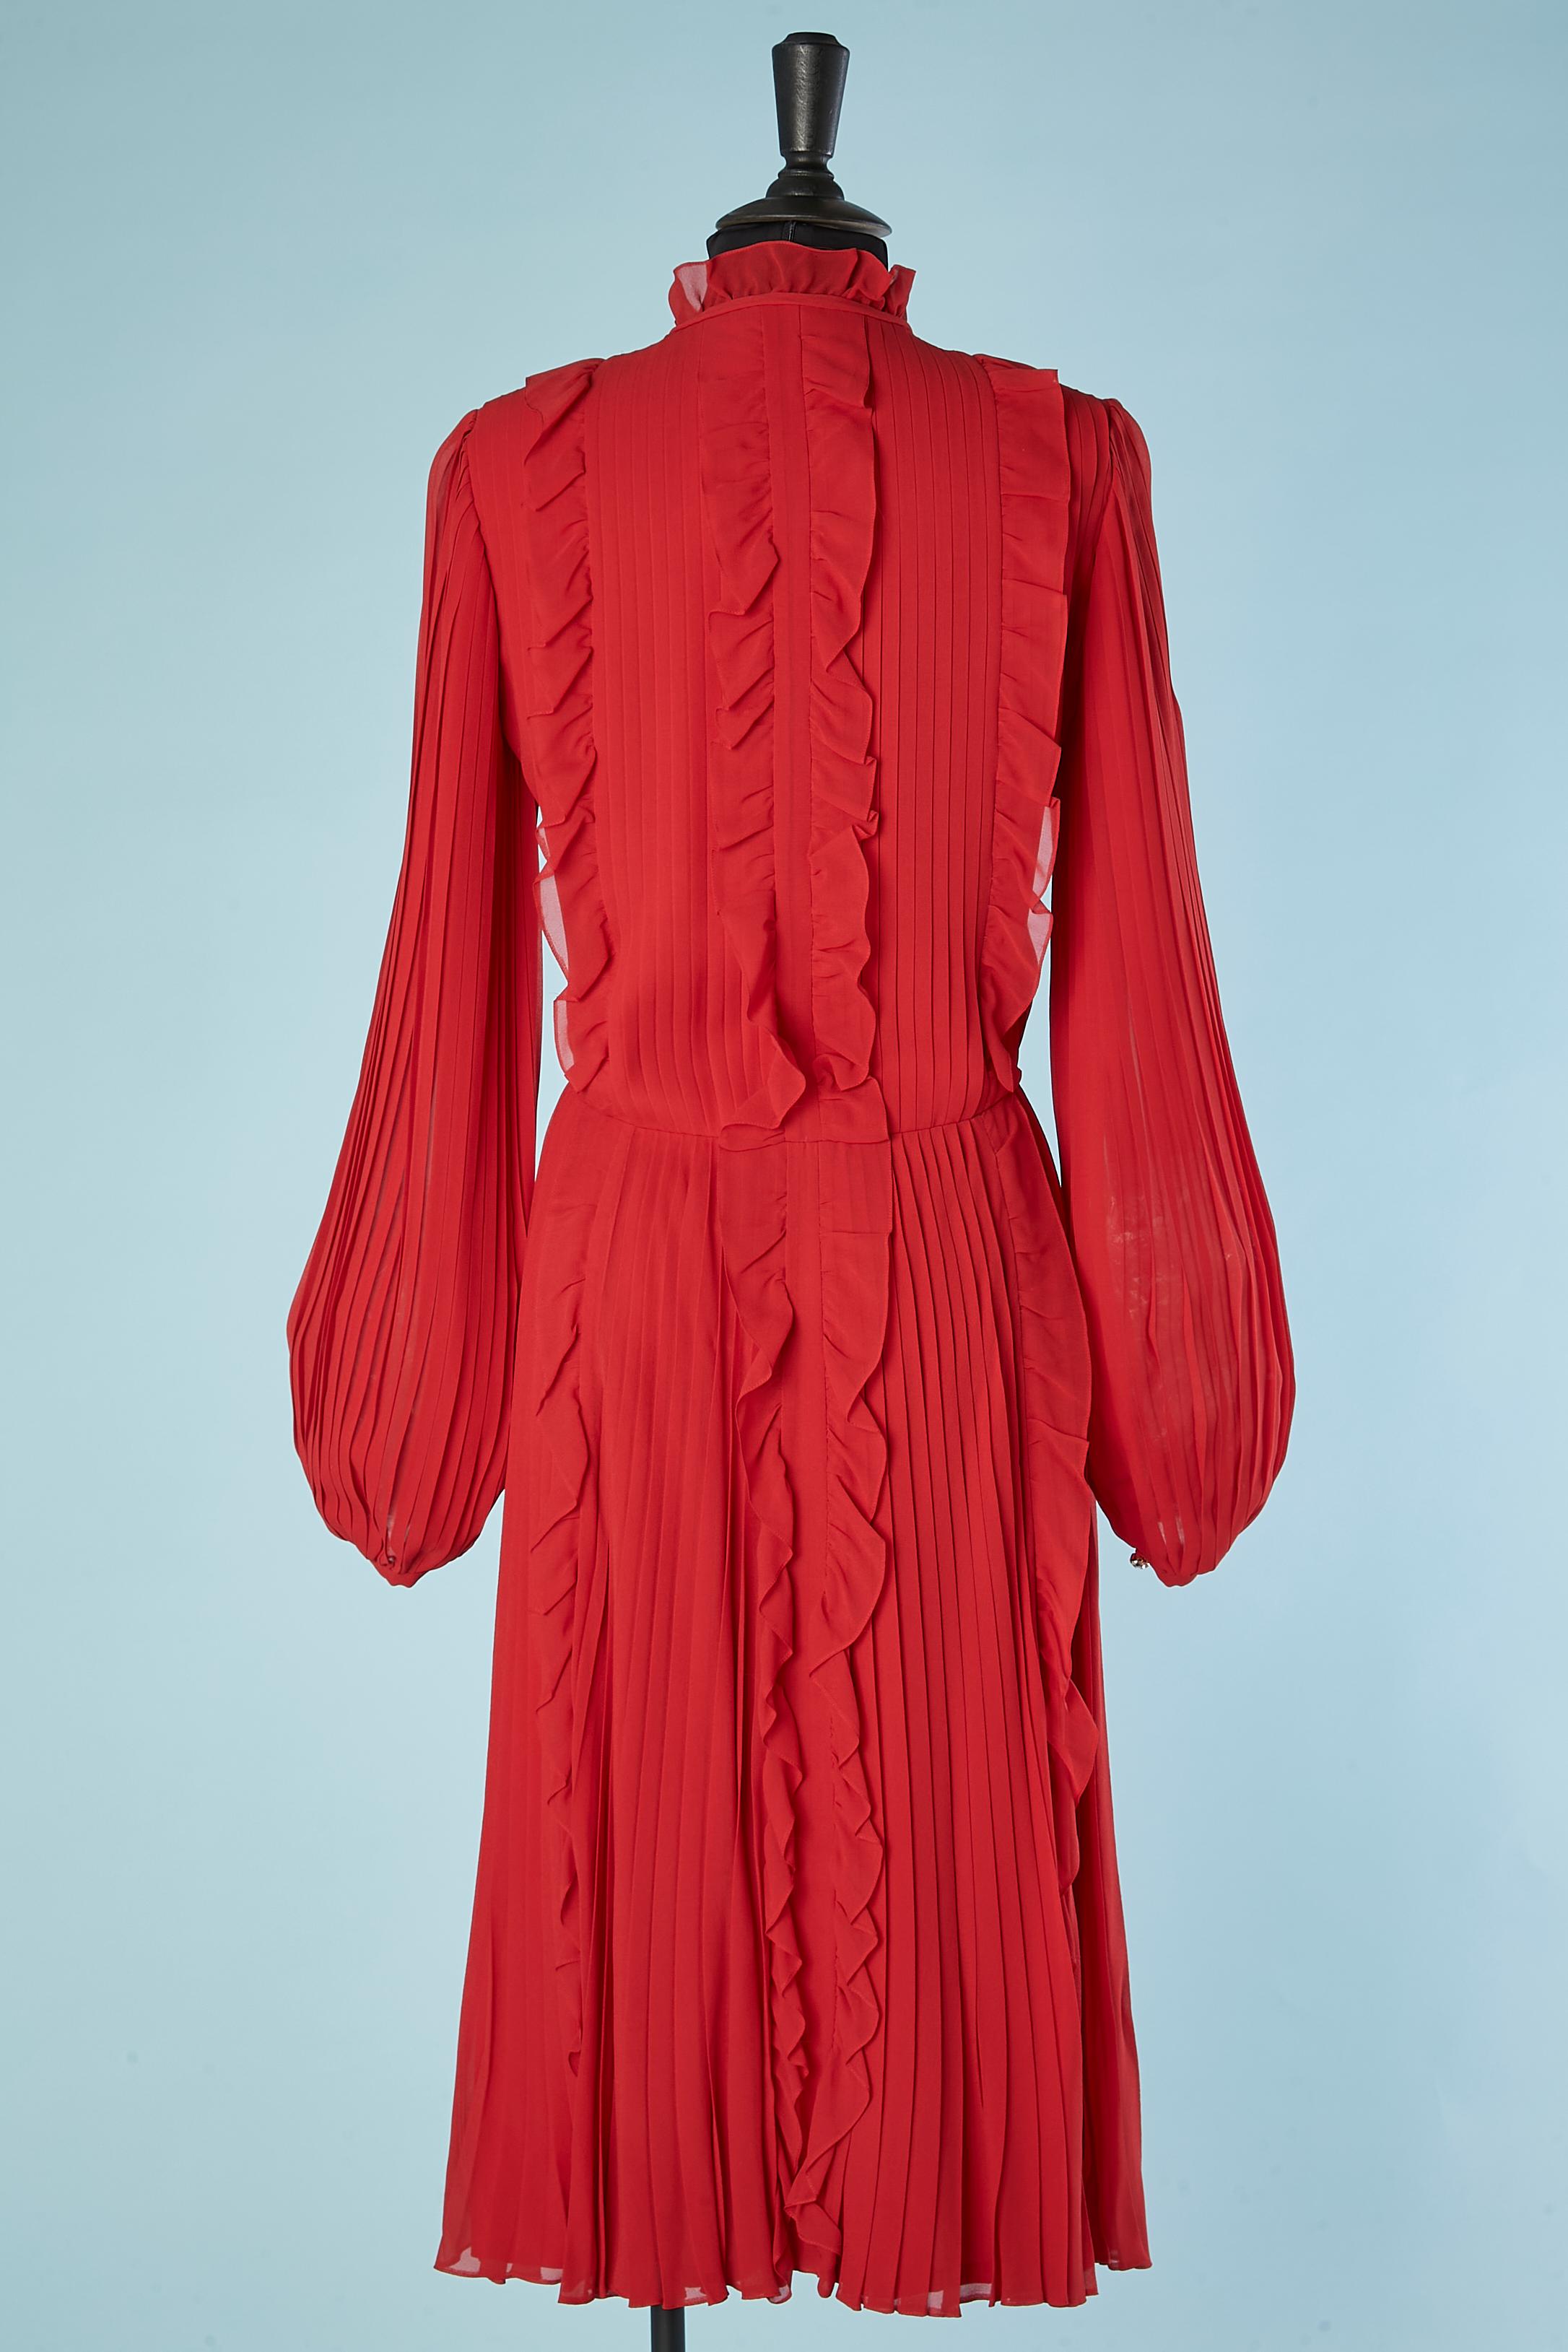 Red silk chiffon pleated cocktail dress with ruffles Philippe Venet Circa 1970 For Sale 3